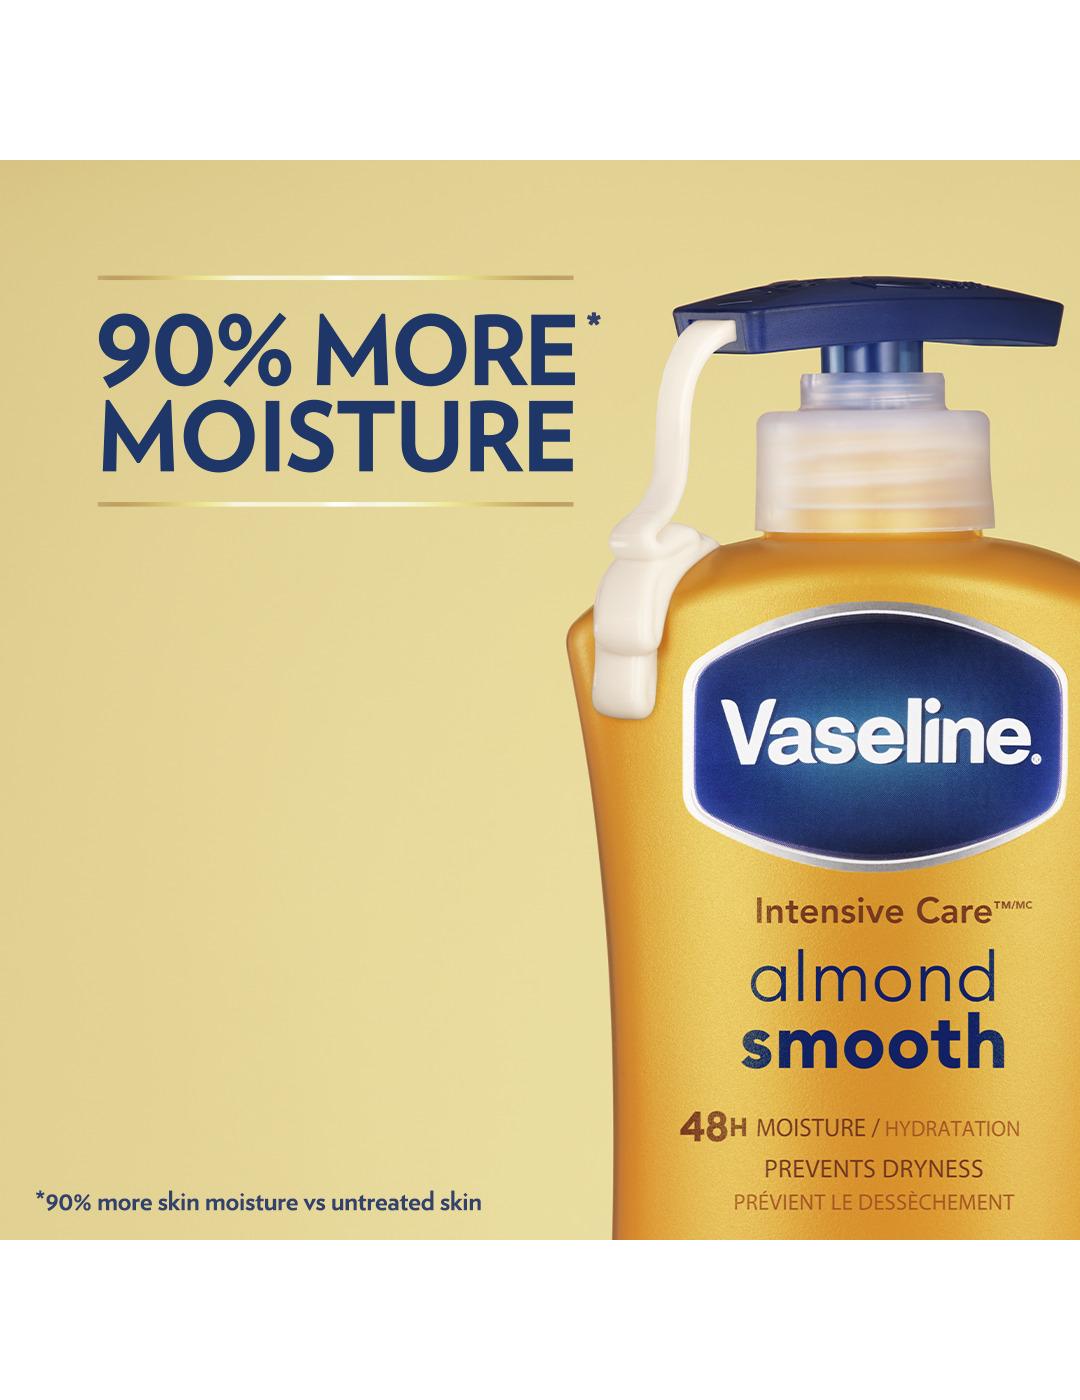 Vaseline Intensive Care Almond Smooth Lotion; image 7 of 8